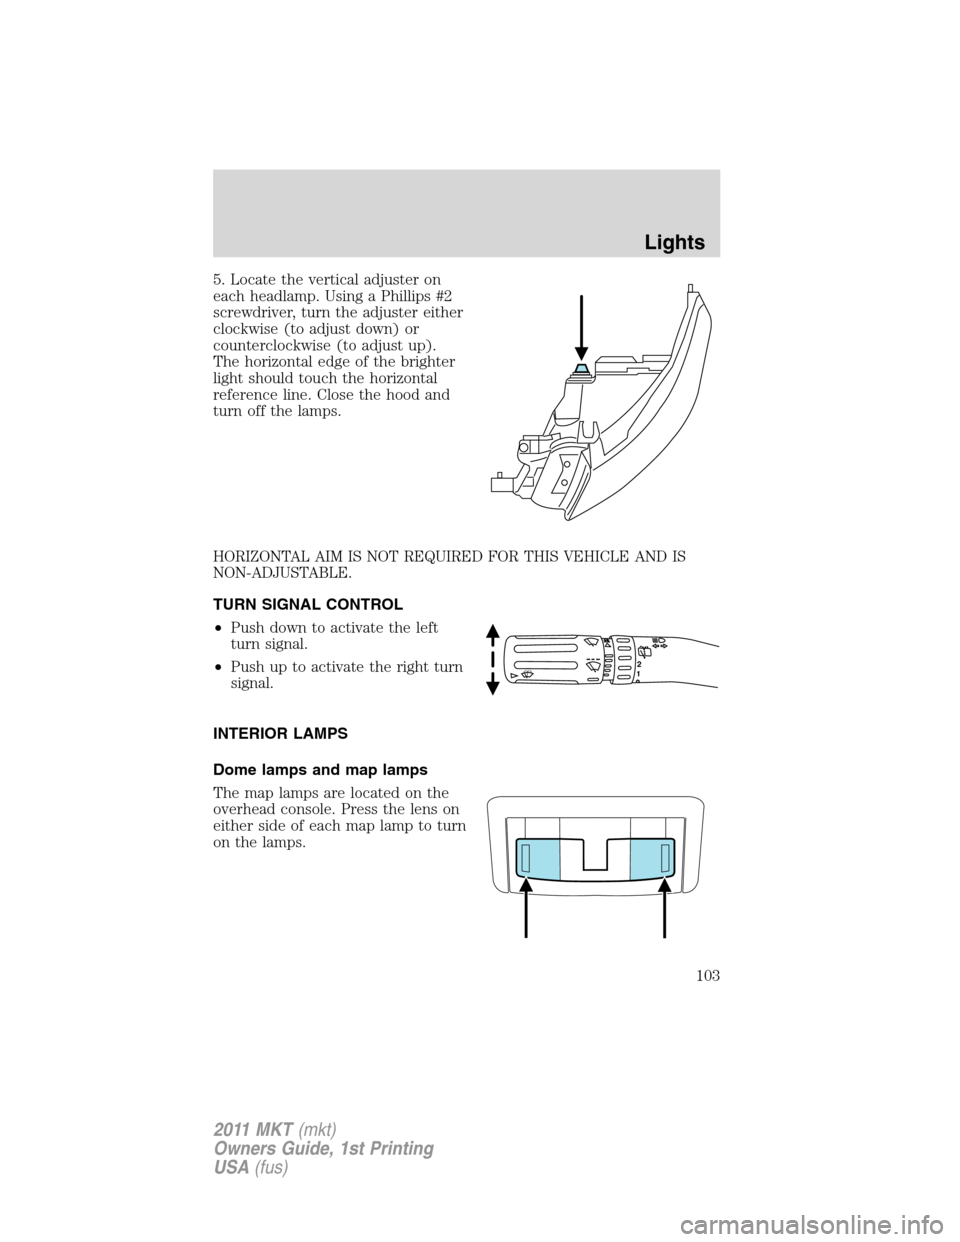 LINCOLN MKT 2011 User Guide 5. Locate the vertical adjuster on
each headlamp. Using a Phillips #2
screwdriver, turn the adjuster either
clockwise (to adjust down) or
counterclockwise (to adjust up).
The horizontal edge of the br